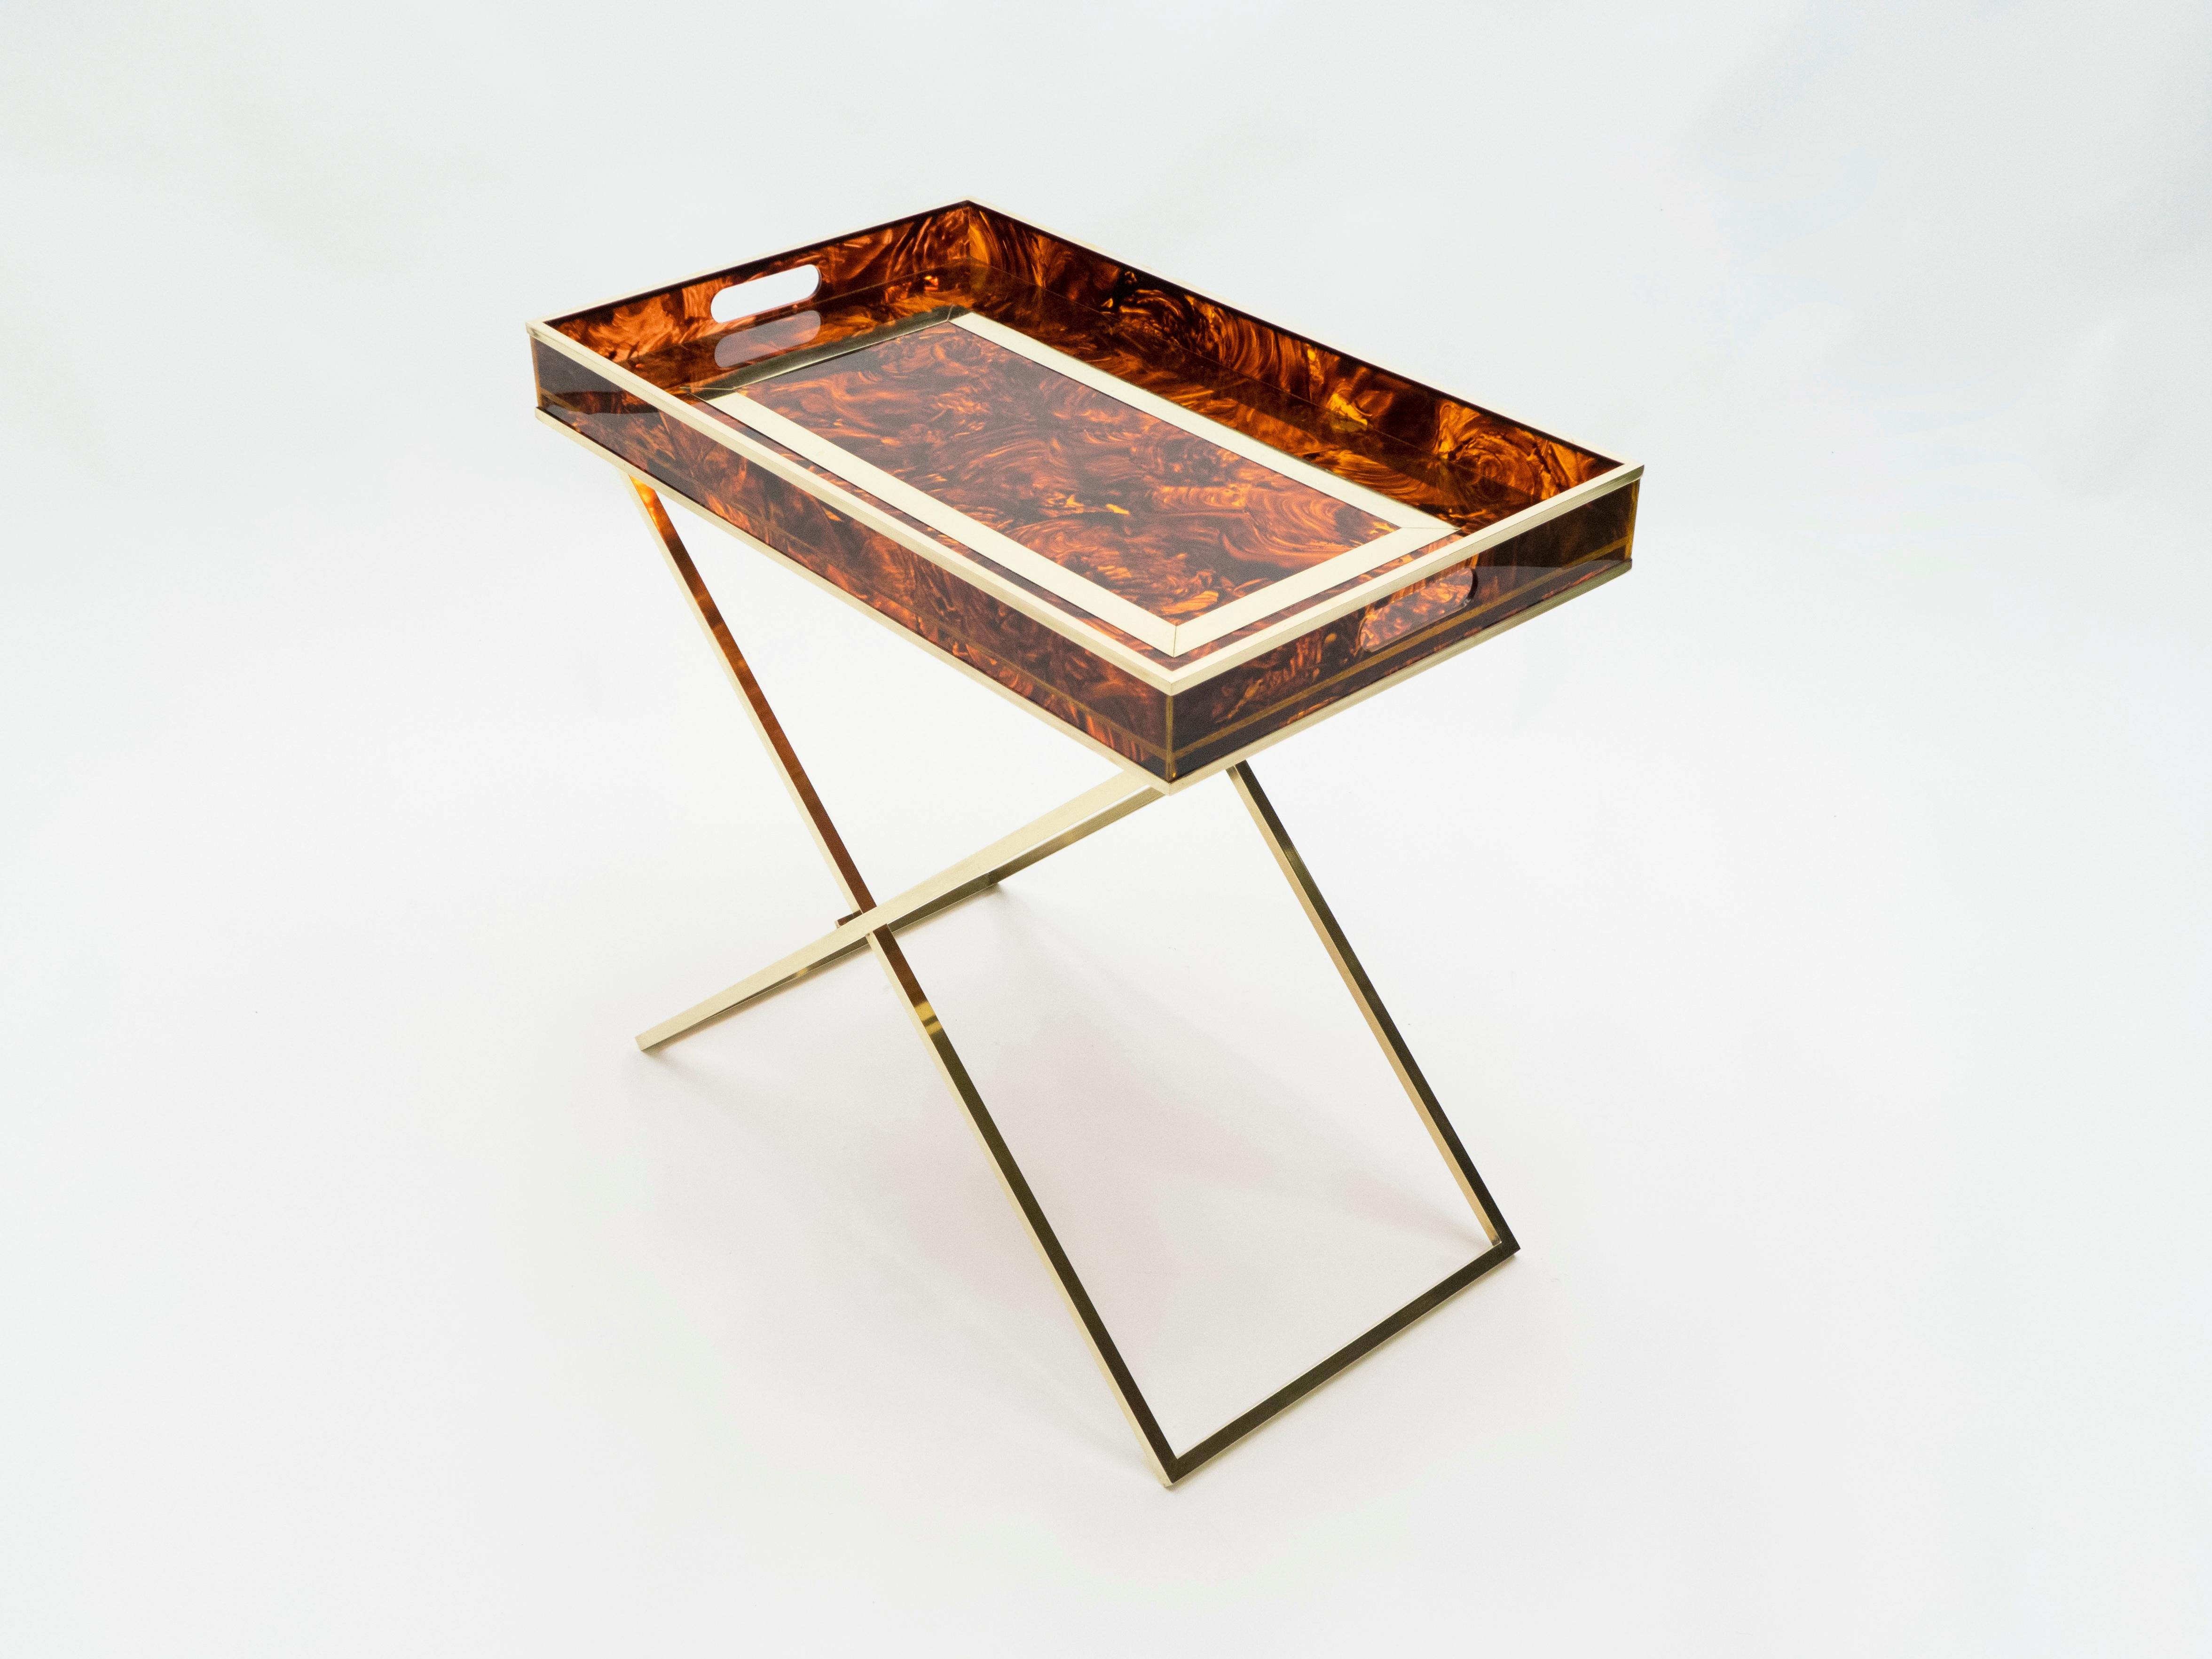 Heighten the modern look of your living area with this sophisticated side table with folding feet and removable tray, in brass and faux tortoise pattern produced by the French manufacturer Maison Mercier back in the 1970s. It is stunning in either